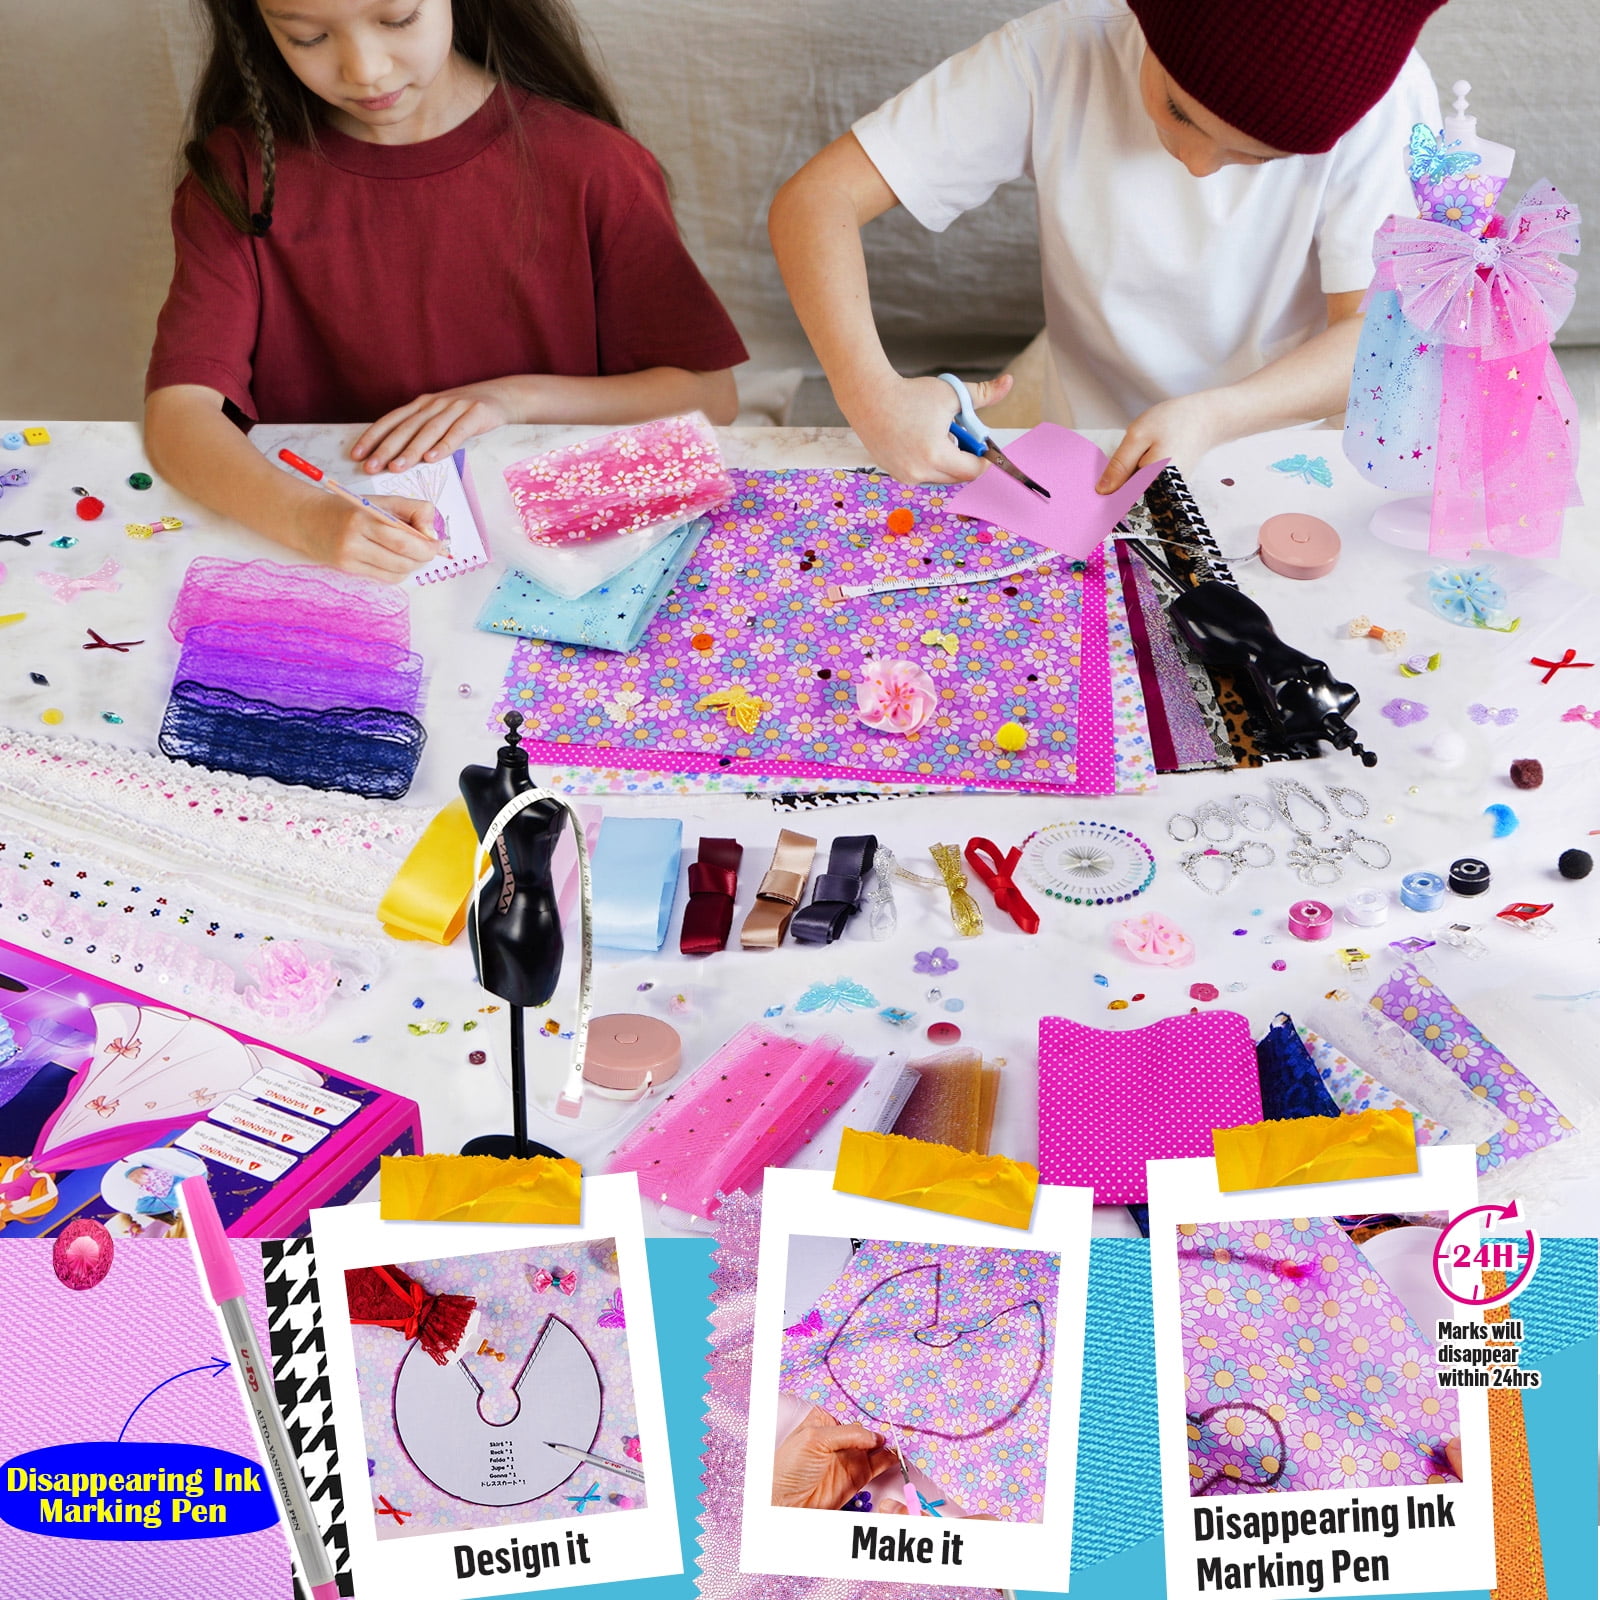 Sanlebi Fashion Design for Kids, Girls Fashion Designer Sewing Kits with  Fabric Mannequin Arts and Crafts for 8 9 10 Years Old – BigaMart